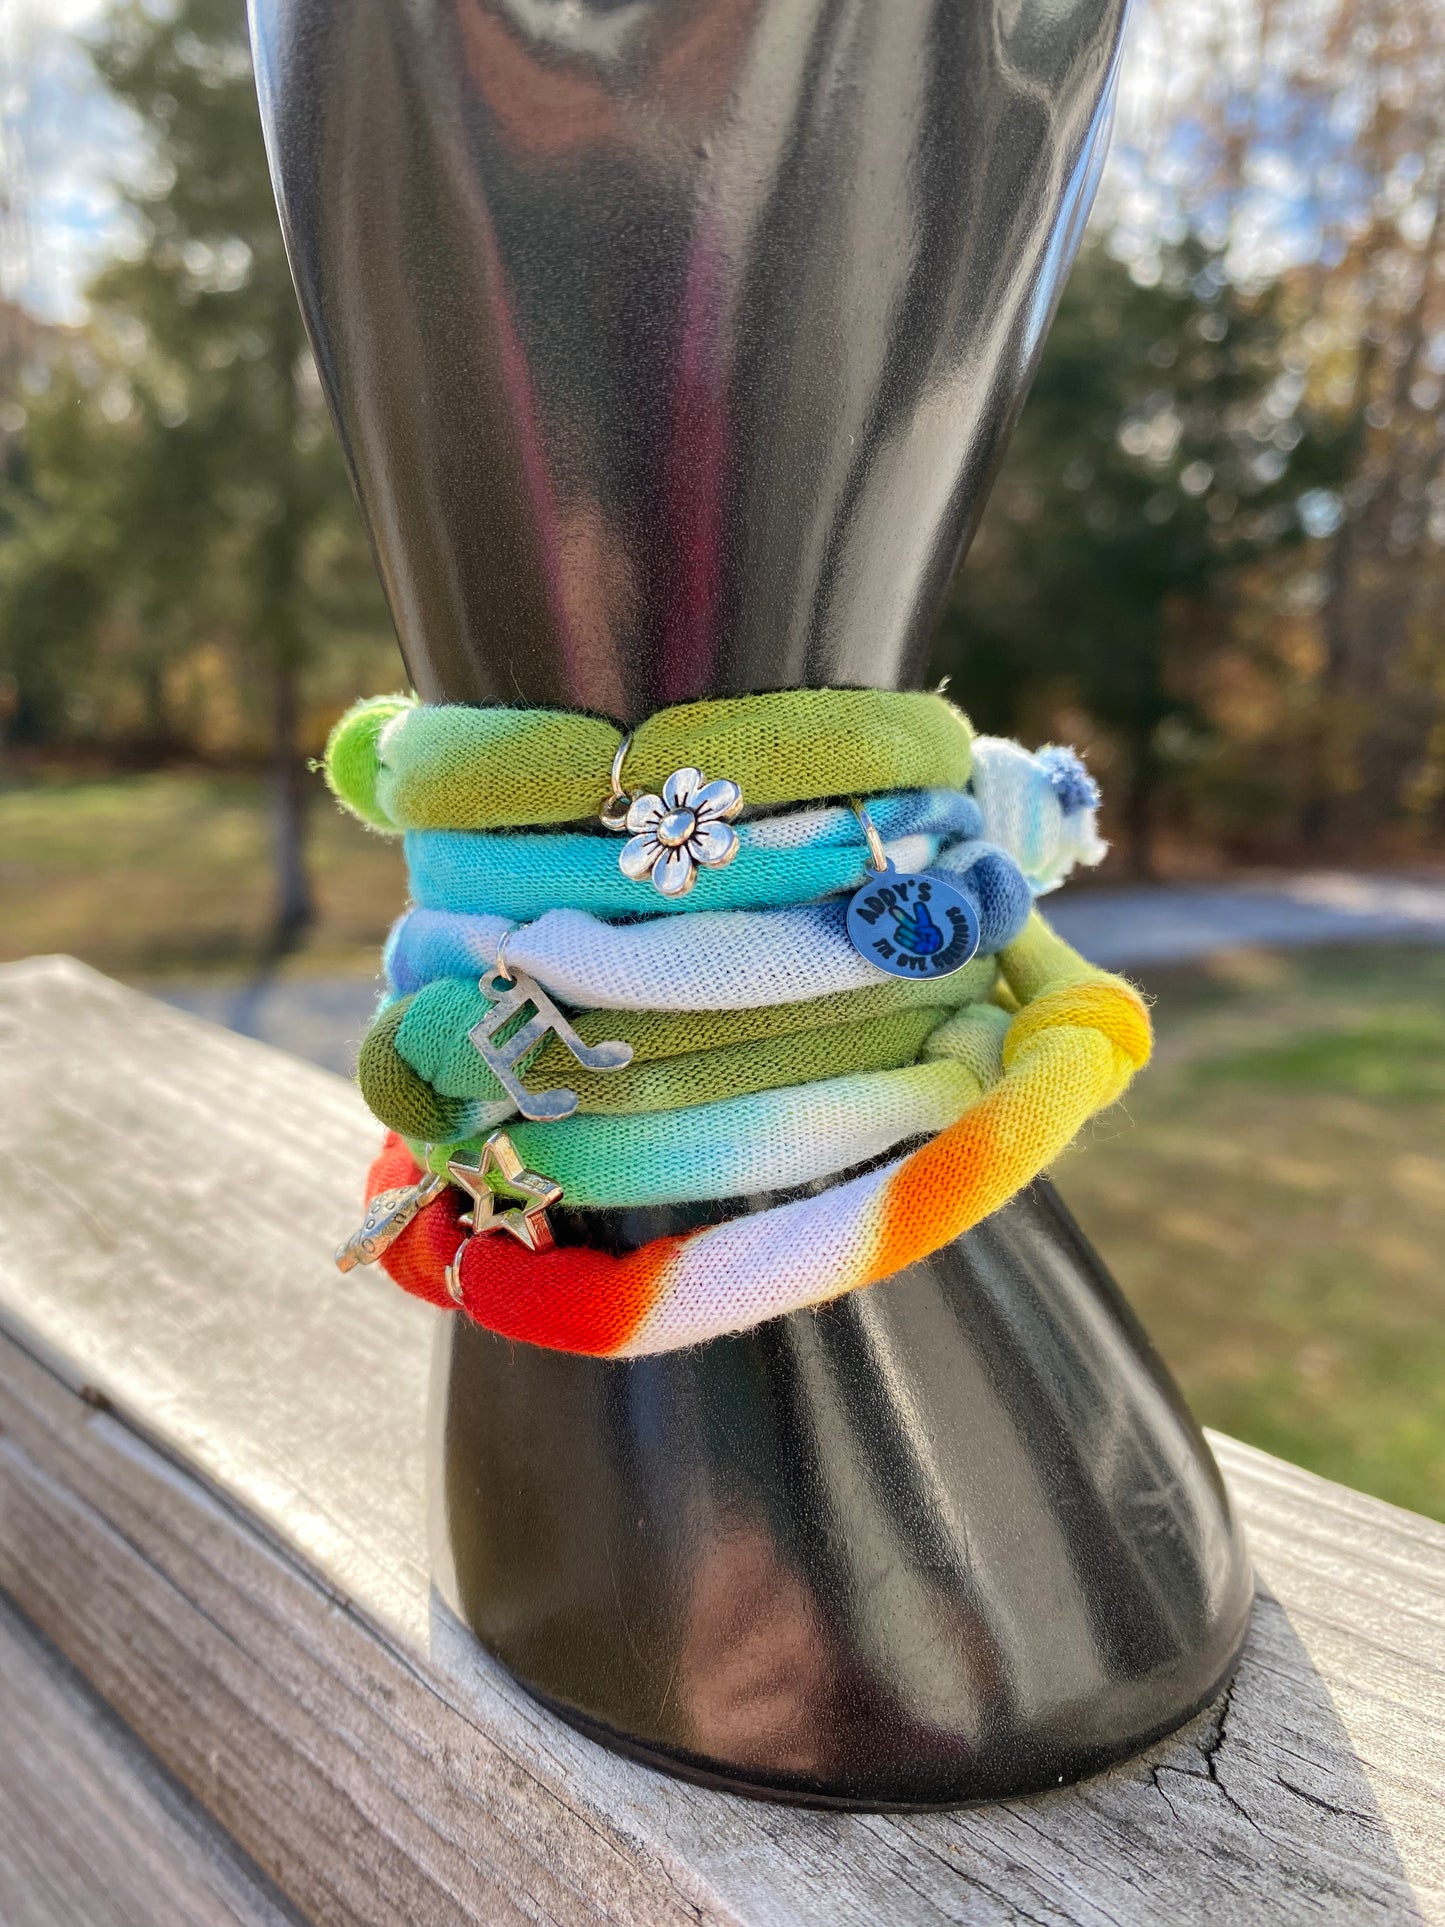 Wild and Free Natural Wraps -Charm Bracelet, necklace, anklet. Your choice of fun design and colors! I’m